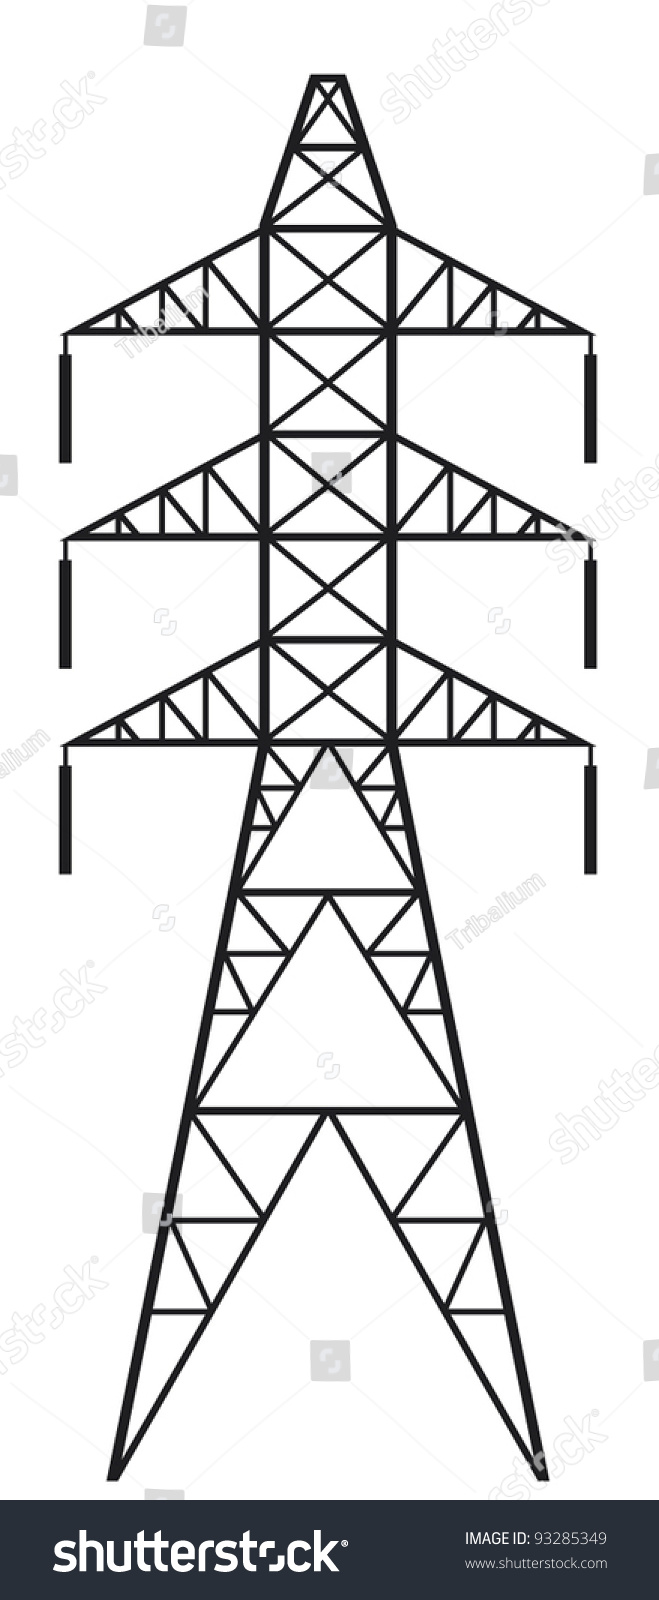 clipart of power lines - photo #42